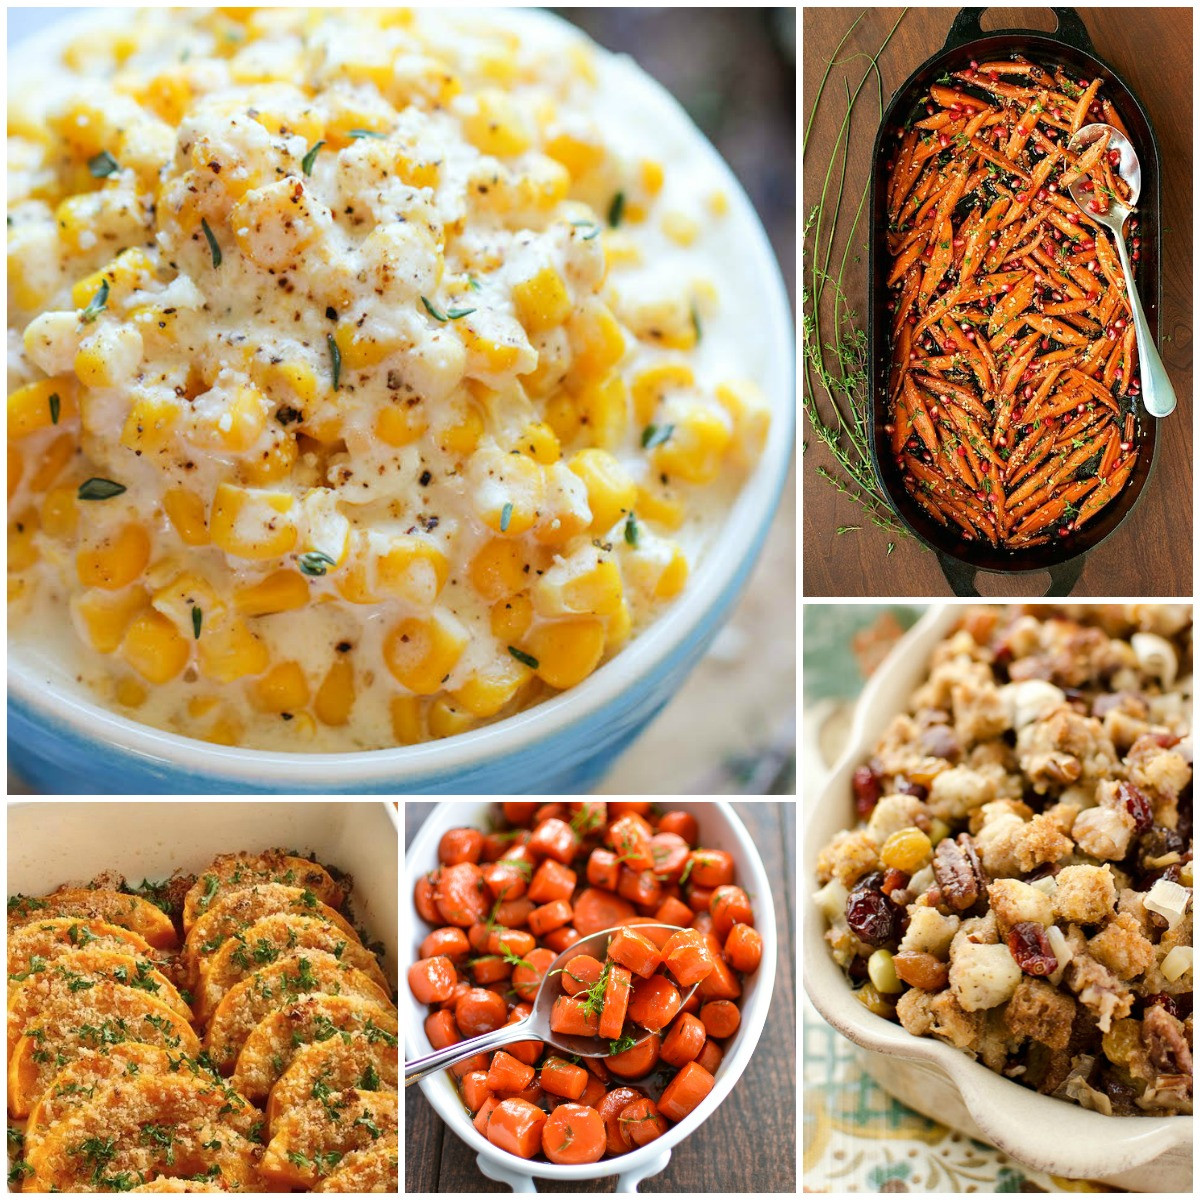 Christmas Dinner Side Dishes Food Network
 25 Most Pinned Side Dish Recipes for Thanksgiving and